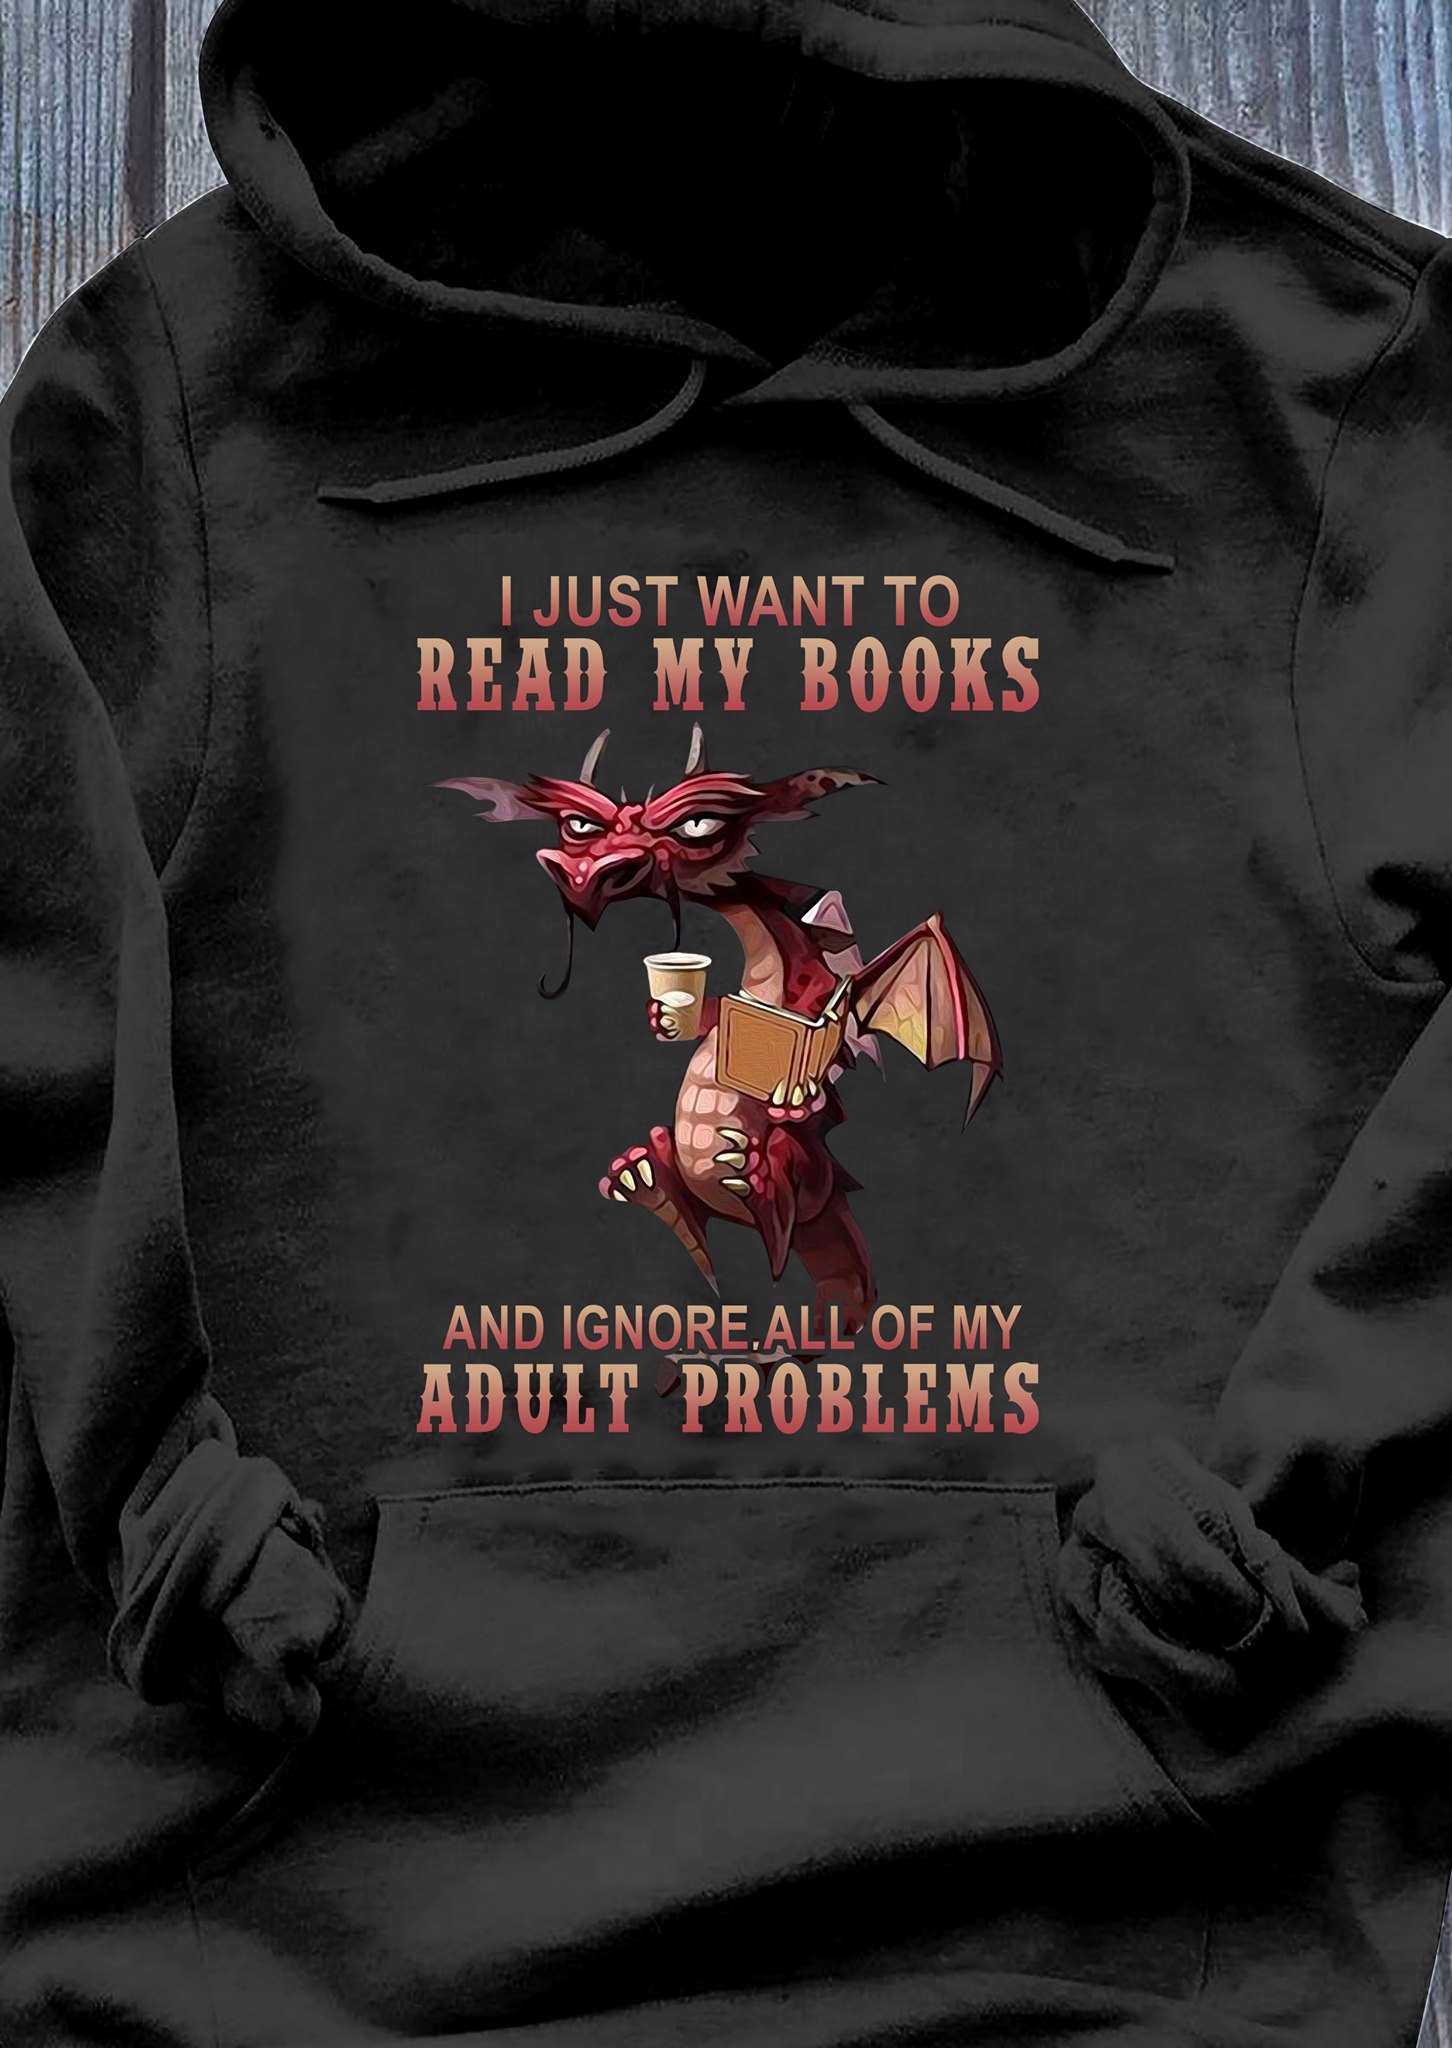 I just want to read my books and ignore all of my adult problems - Dragon, book and coffee